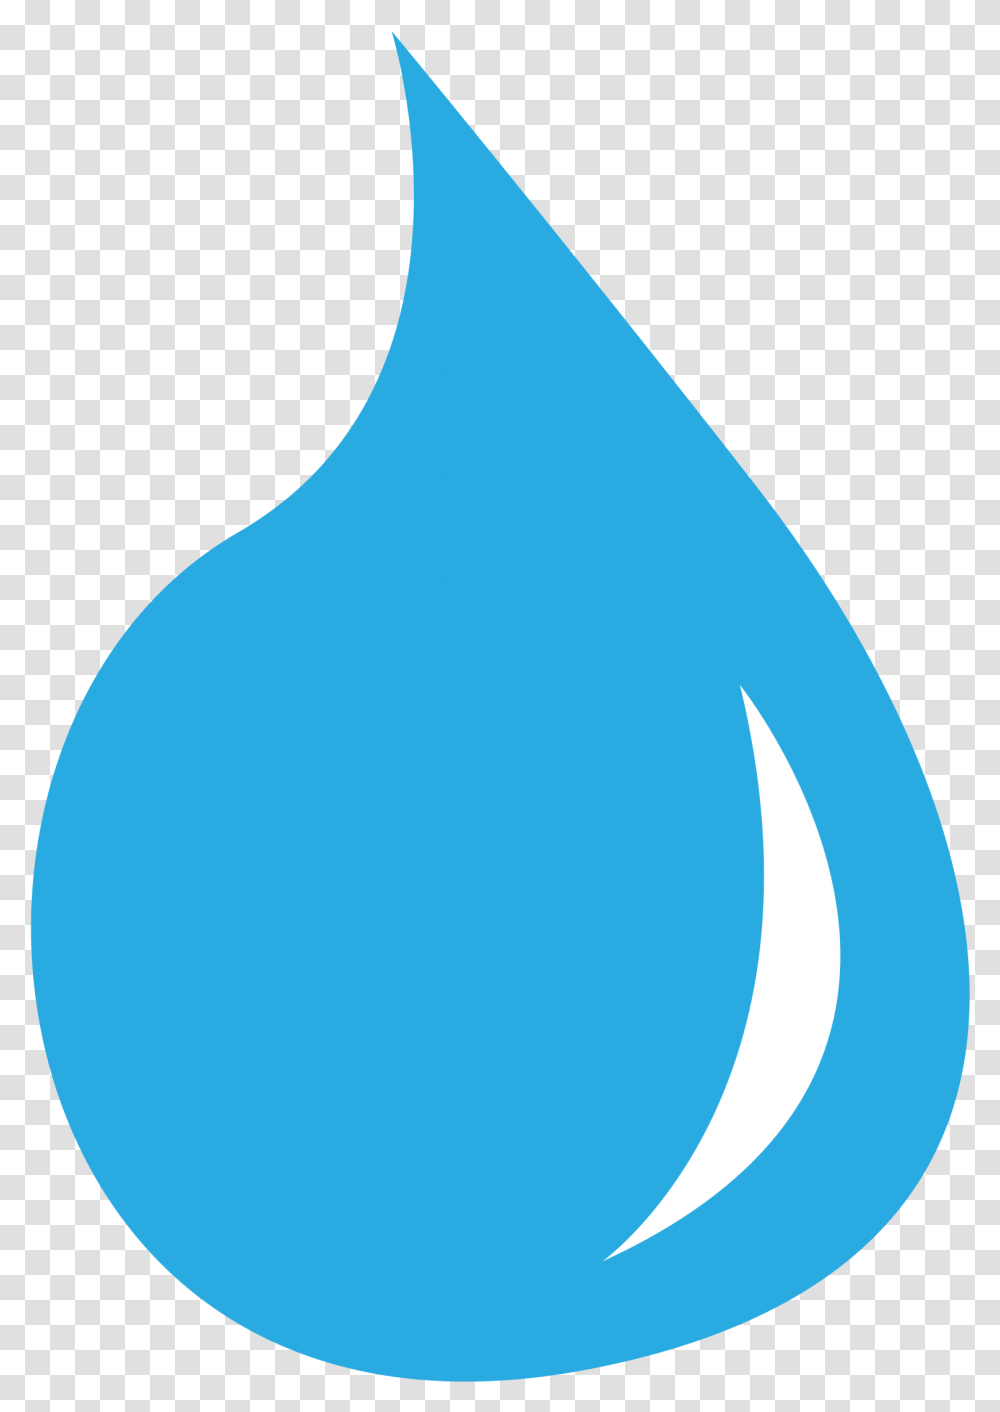 Water Drop Icon Clipart Best Apple Logo Light Blue, Droplet, Balloon Transparent Png